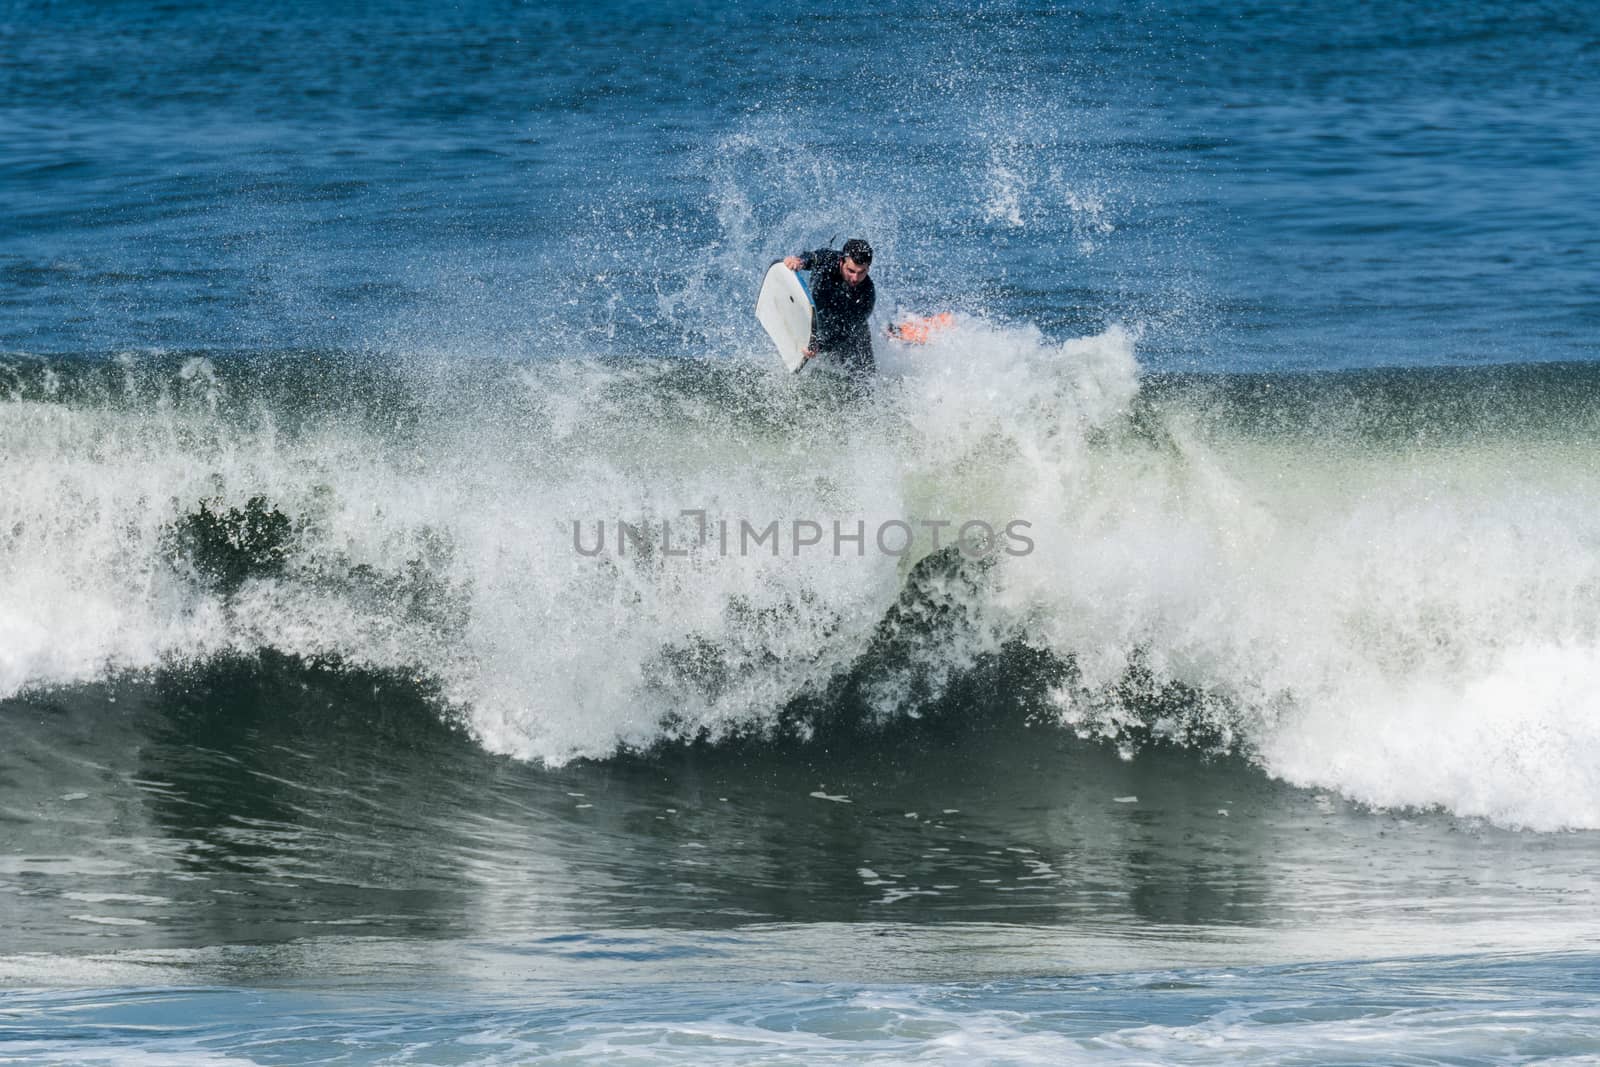 Bodyboarder in action on the ocean waves on a sunny day.